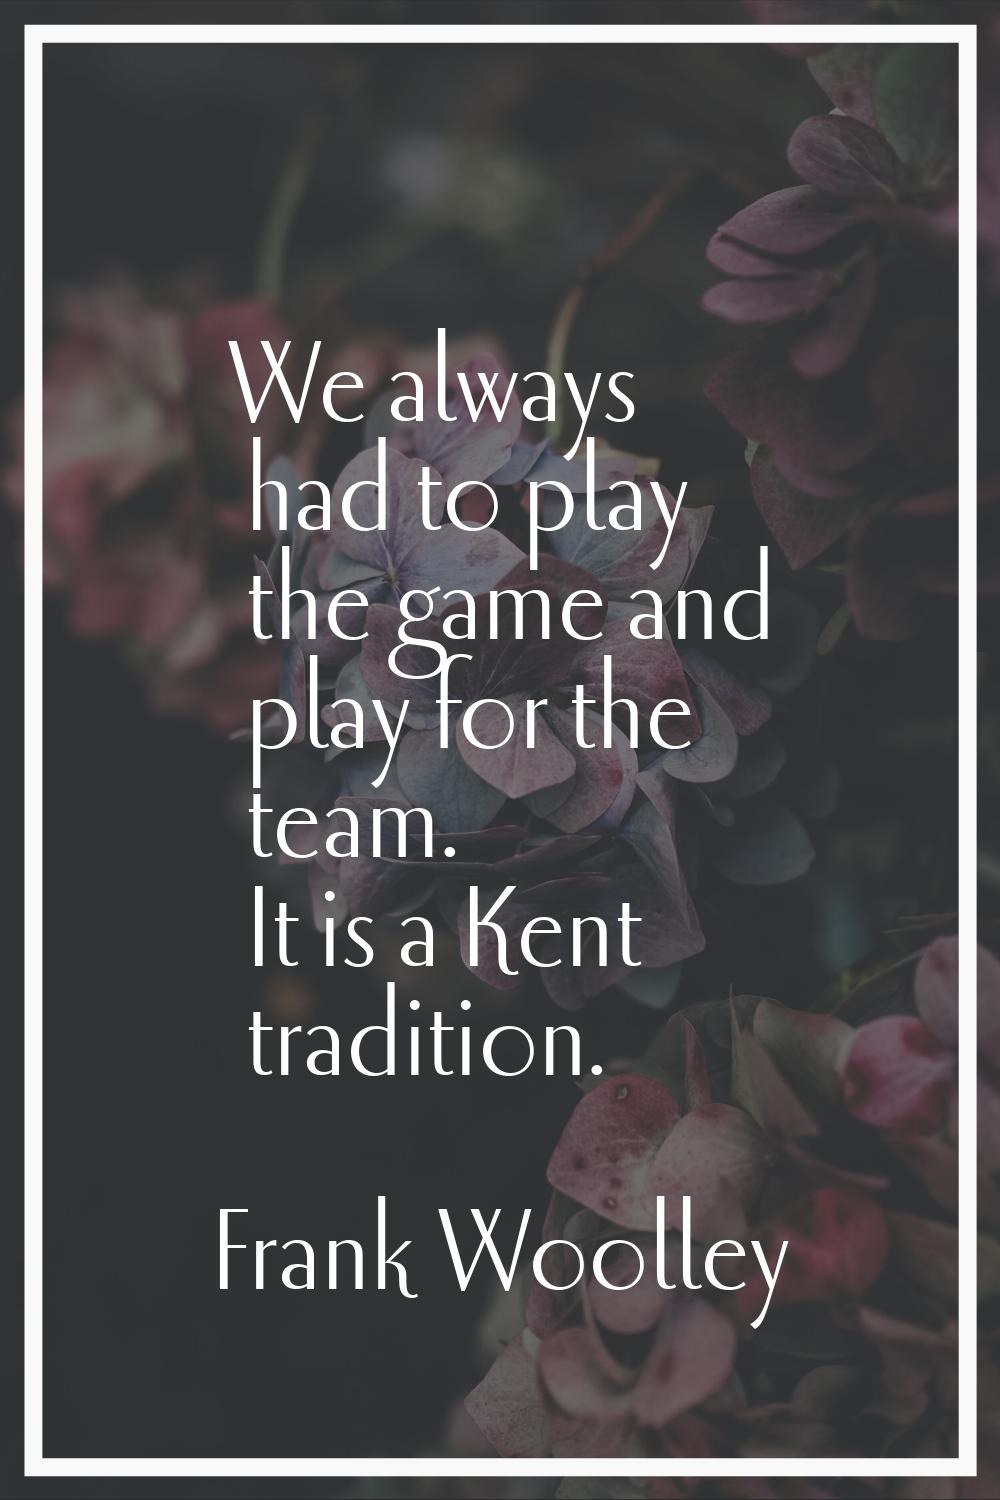 We always had to play the game and play for the team. It is a Kent tradition.